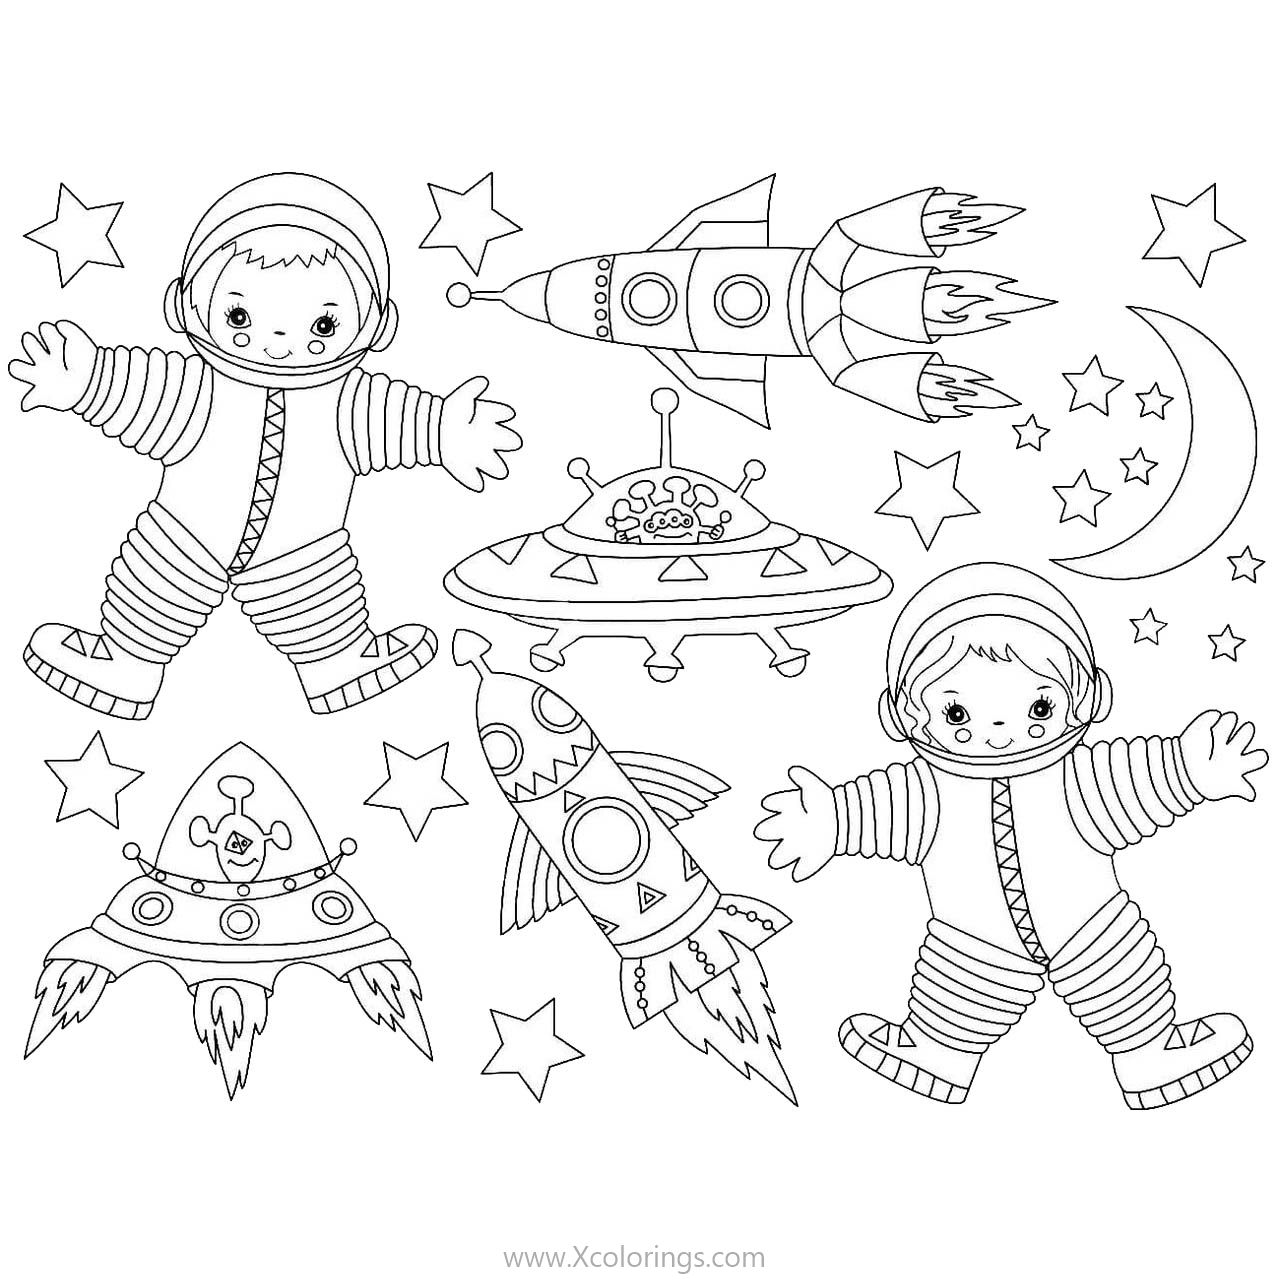 Baby Astronaut Coloring Page